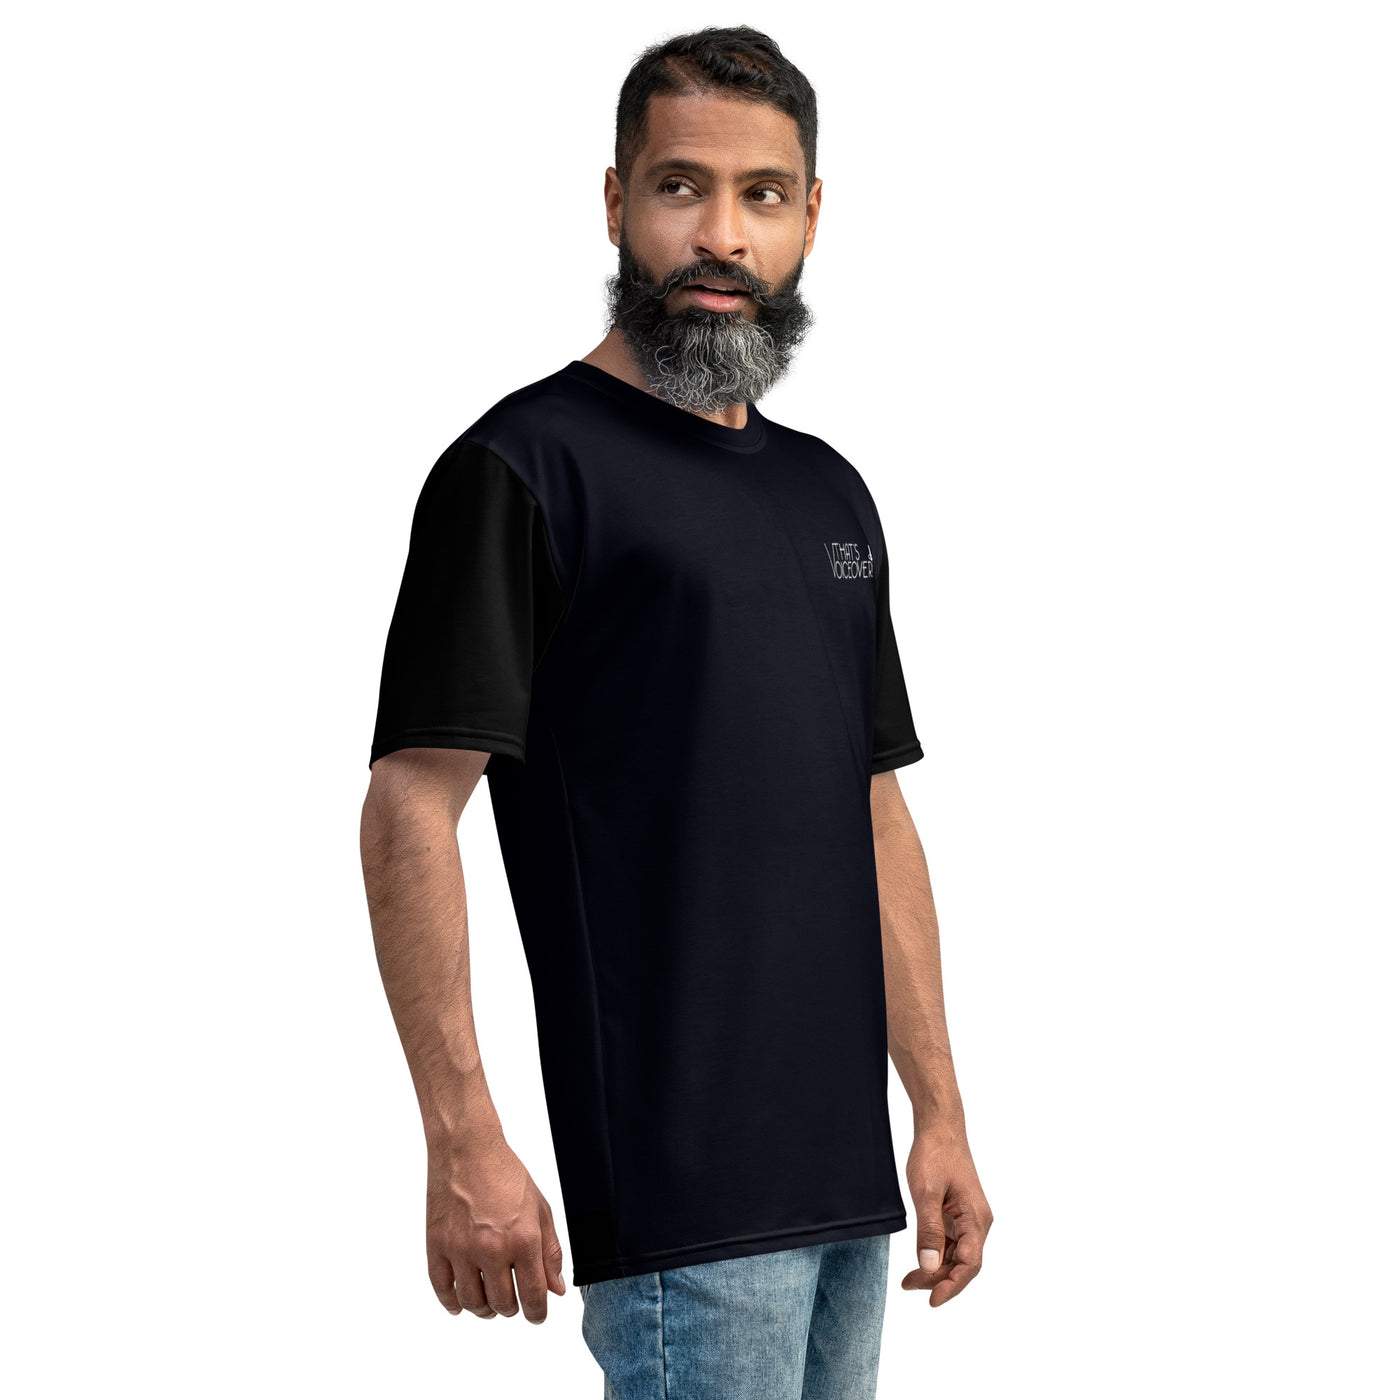 That's Voiceover! Black Male t-shirt